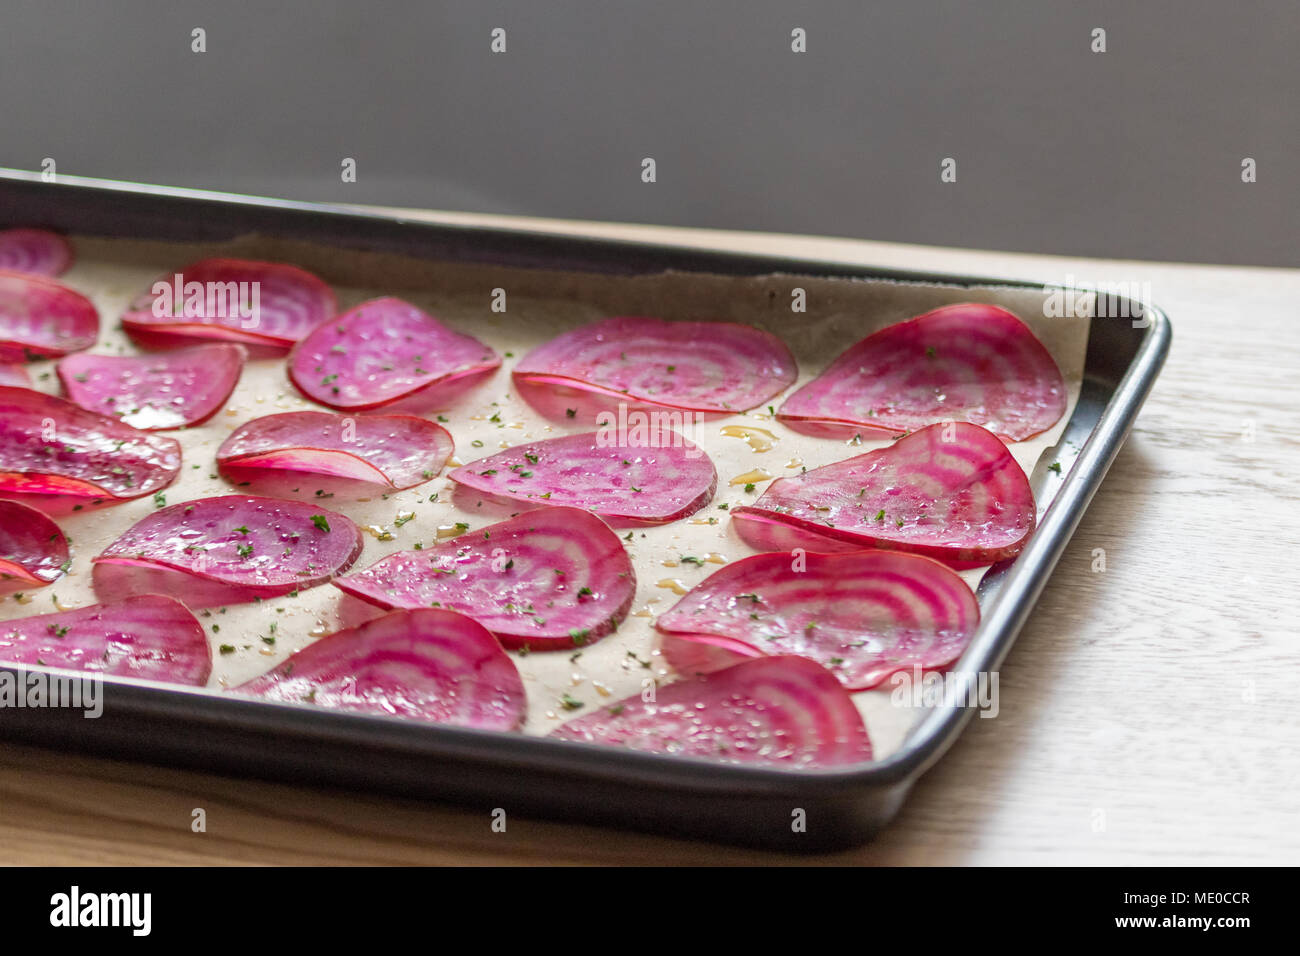 Slices of candy beetroot (chioggia beets) on a lined baking tray, ready for making oven-baked veggie chips. Stock Photo